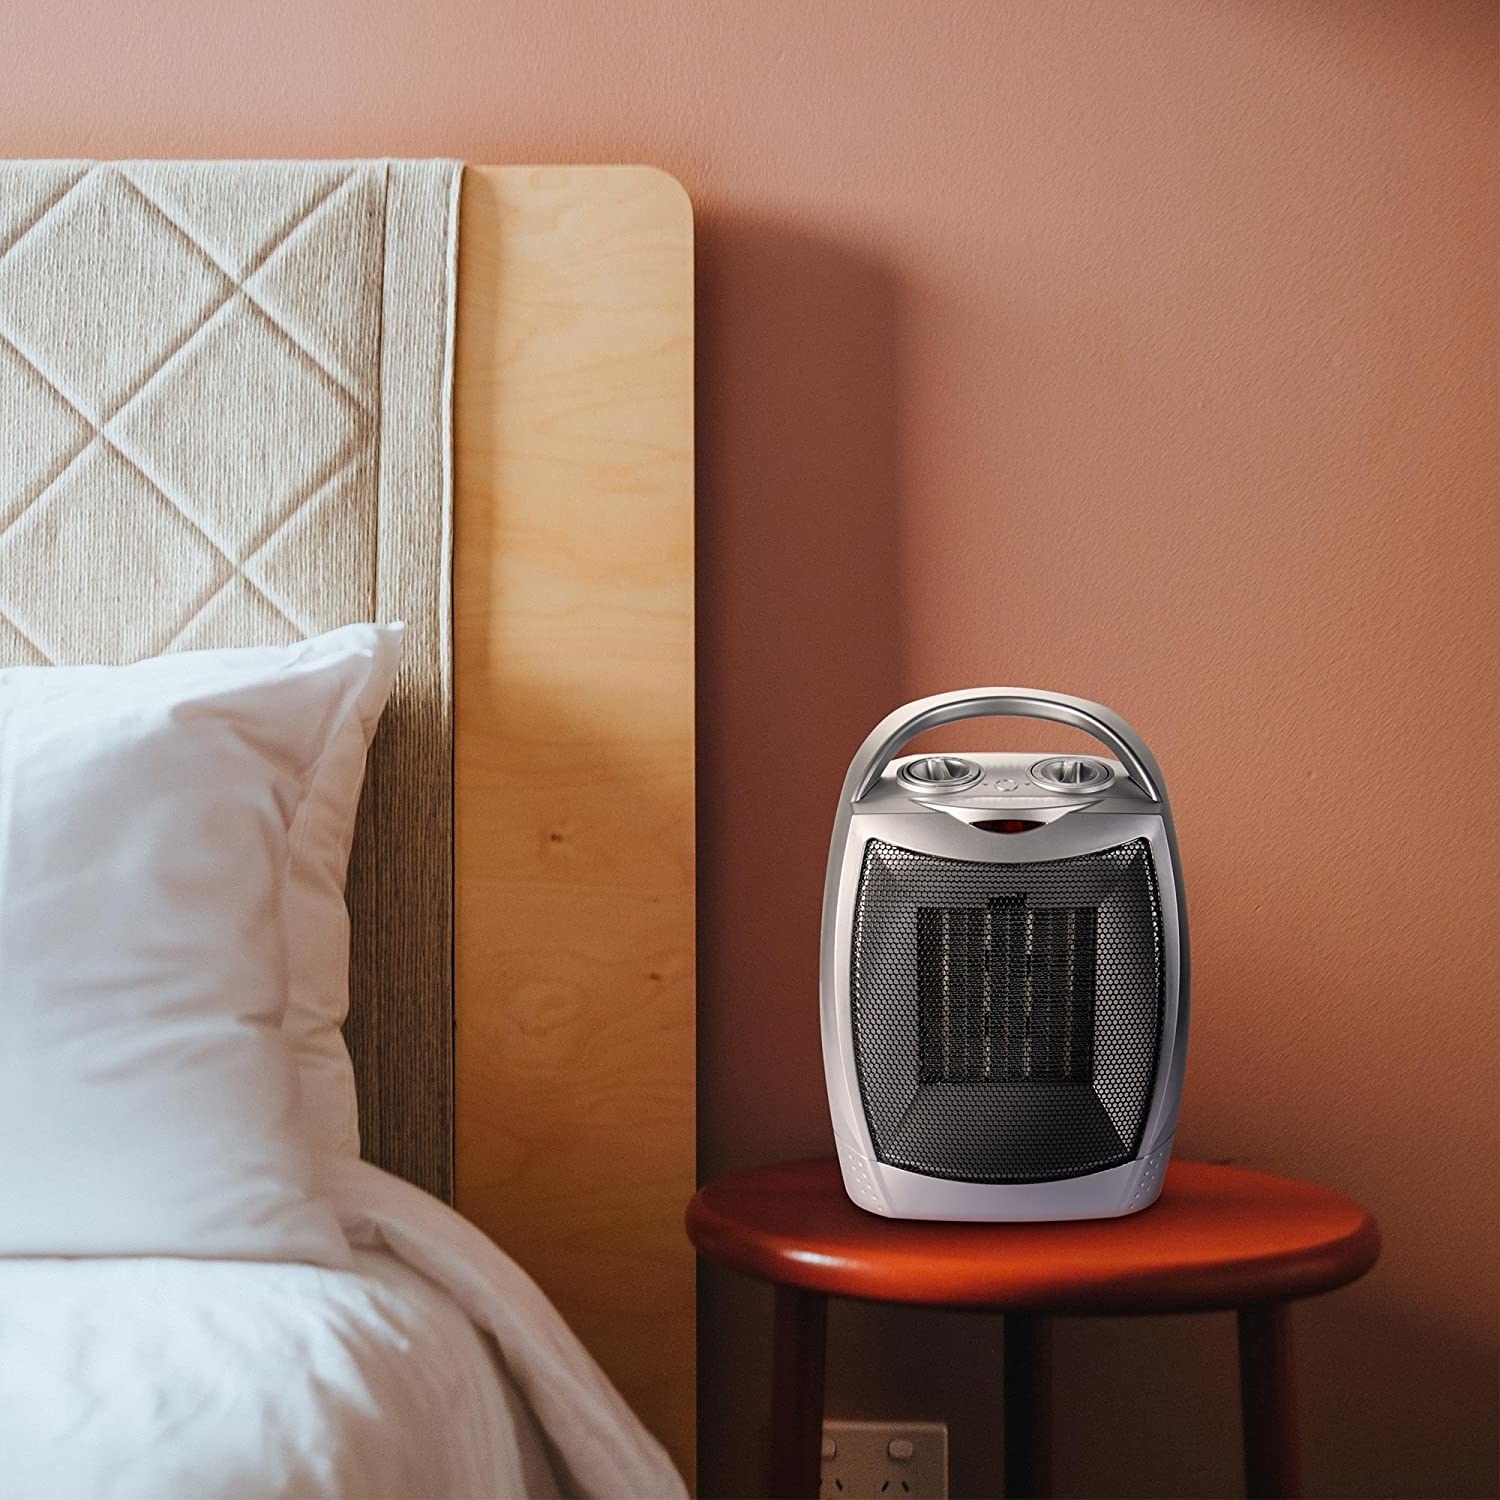 The space heater on a bedside table